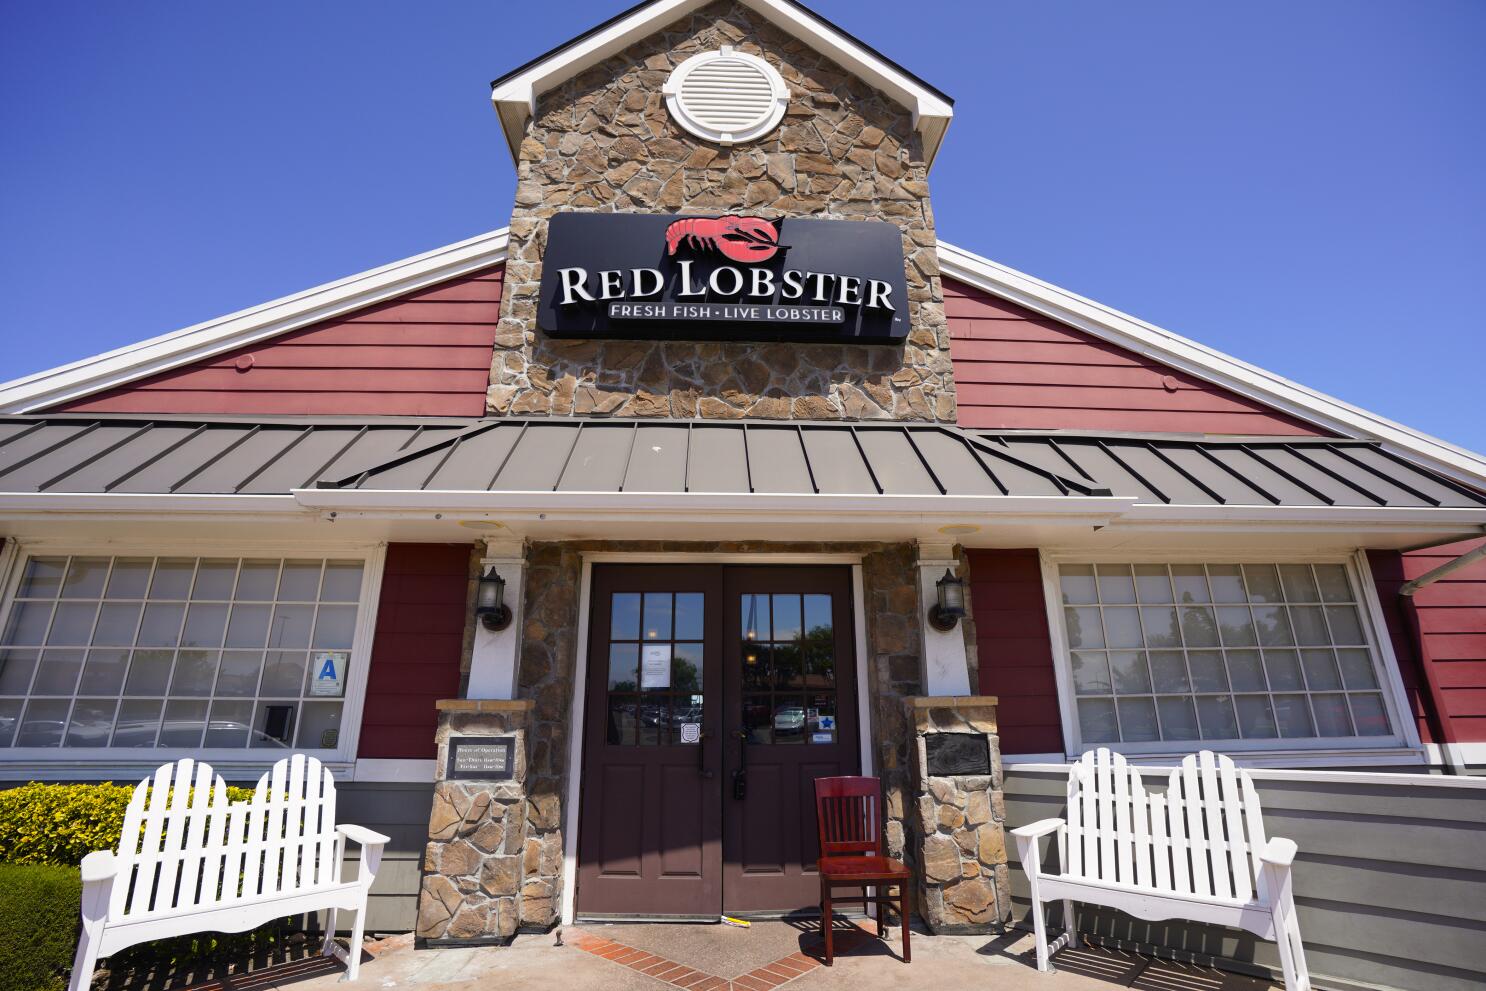 20-facts-about-red-lobster-restaurant